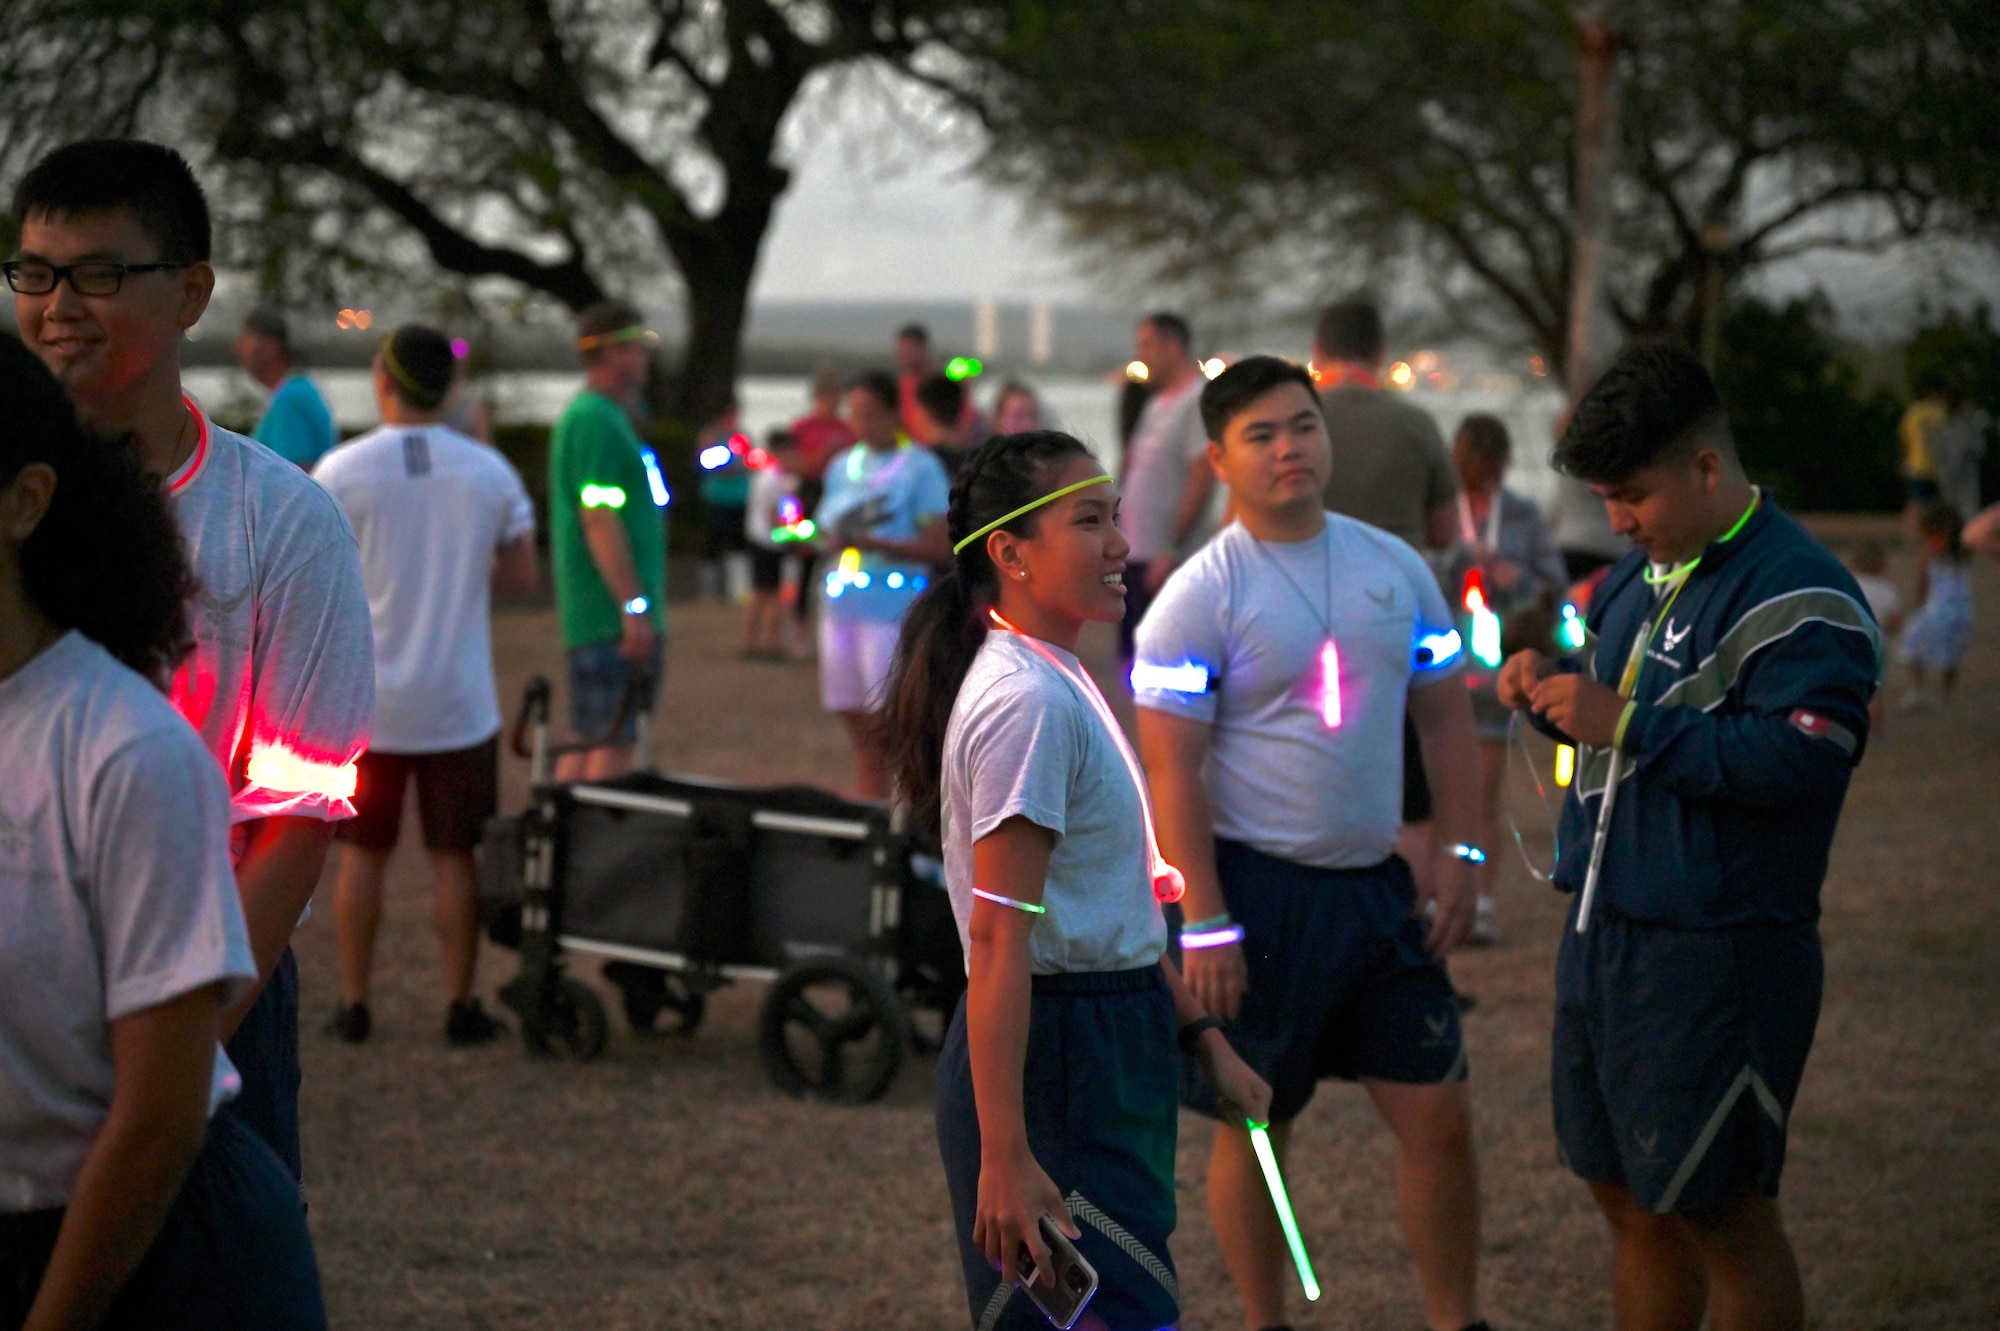 Members from the University of Hawaii at Manoa Air Force Reserve Officer Training Corps prepare to run during the Sexual Assault Awareness and Prevention Month glow run at Joint Base Pearl Harbor-Hickam, Hawaii, April 1, 2022. Cadets and cadre members participated in the 5k run around the Hickam-side of JBPHH to help raise awareness for sexual assault and resources for victims in the military. (U.S. Air Force photo by 1st Lt. Benjamin Aronson)